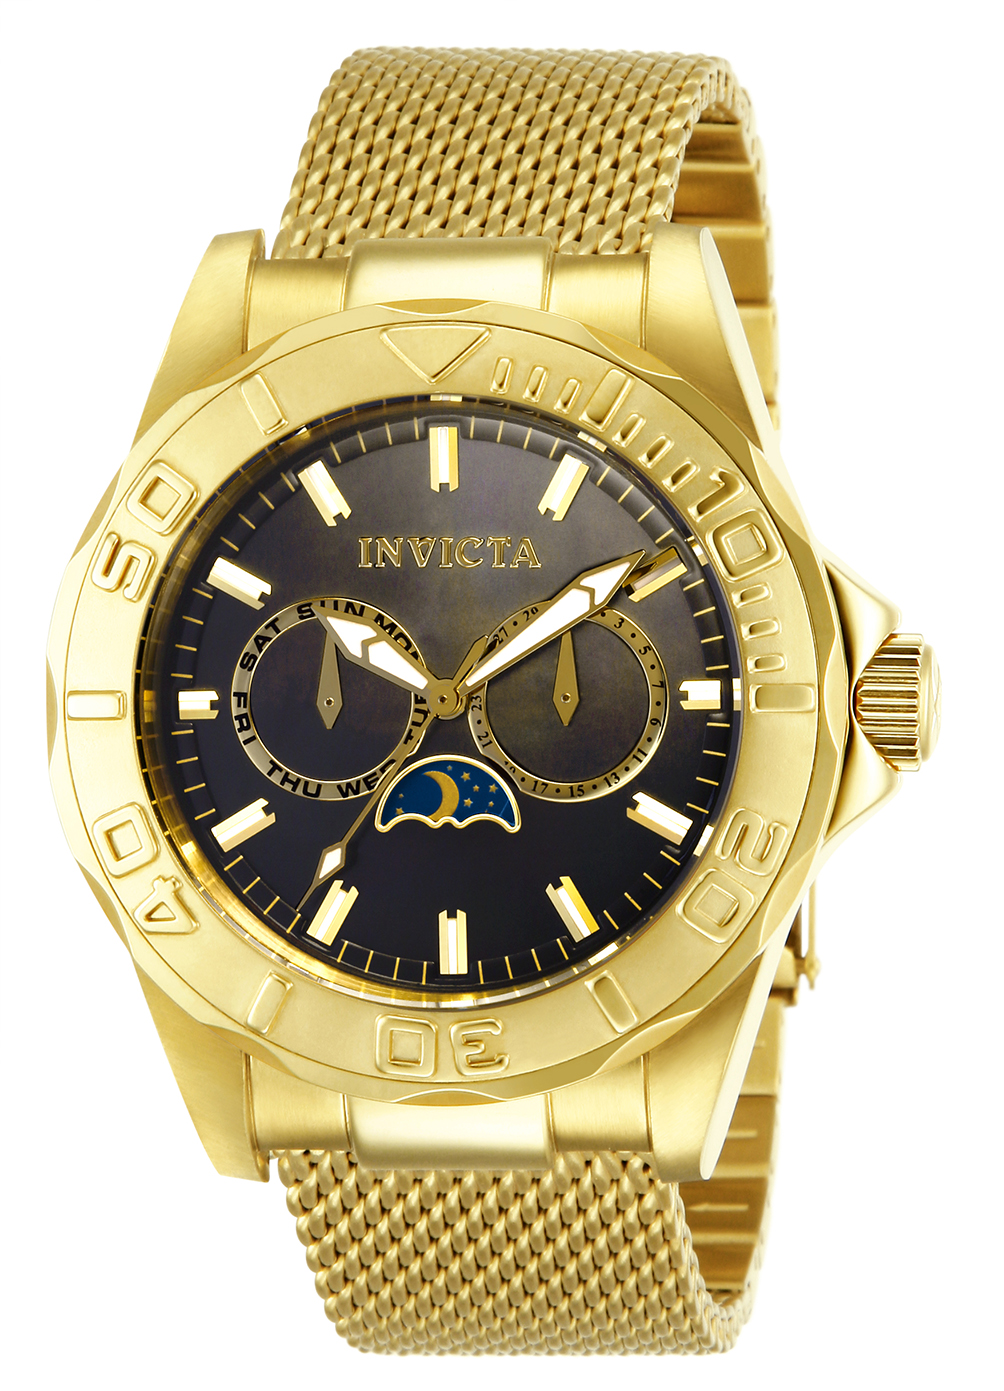 Invicta Pro Diver Men's Watch w/ Mother of Pearl Dial - 44mm, Gold (10601)